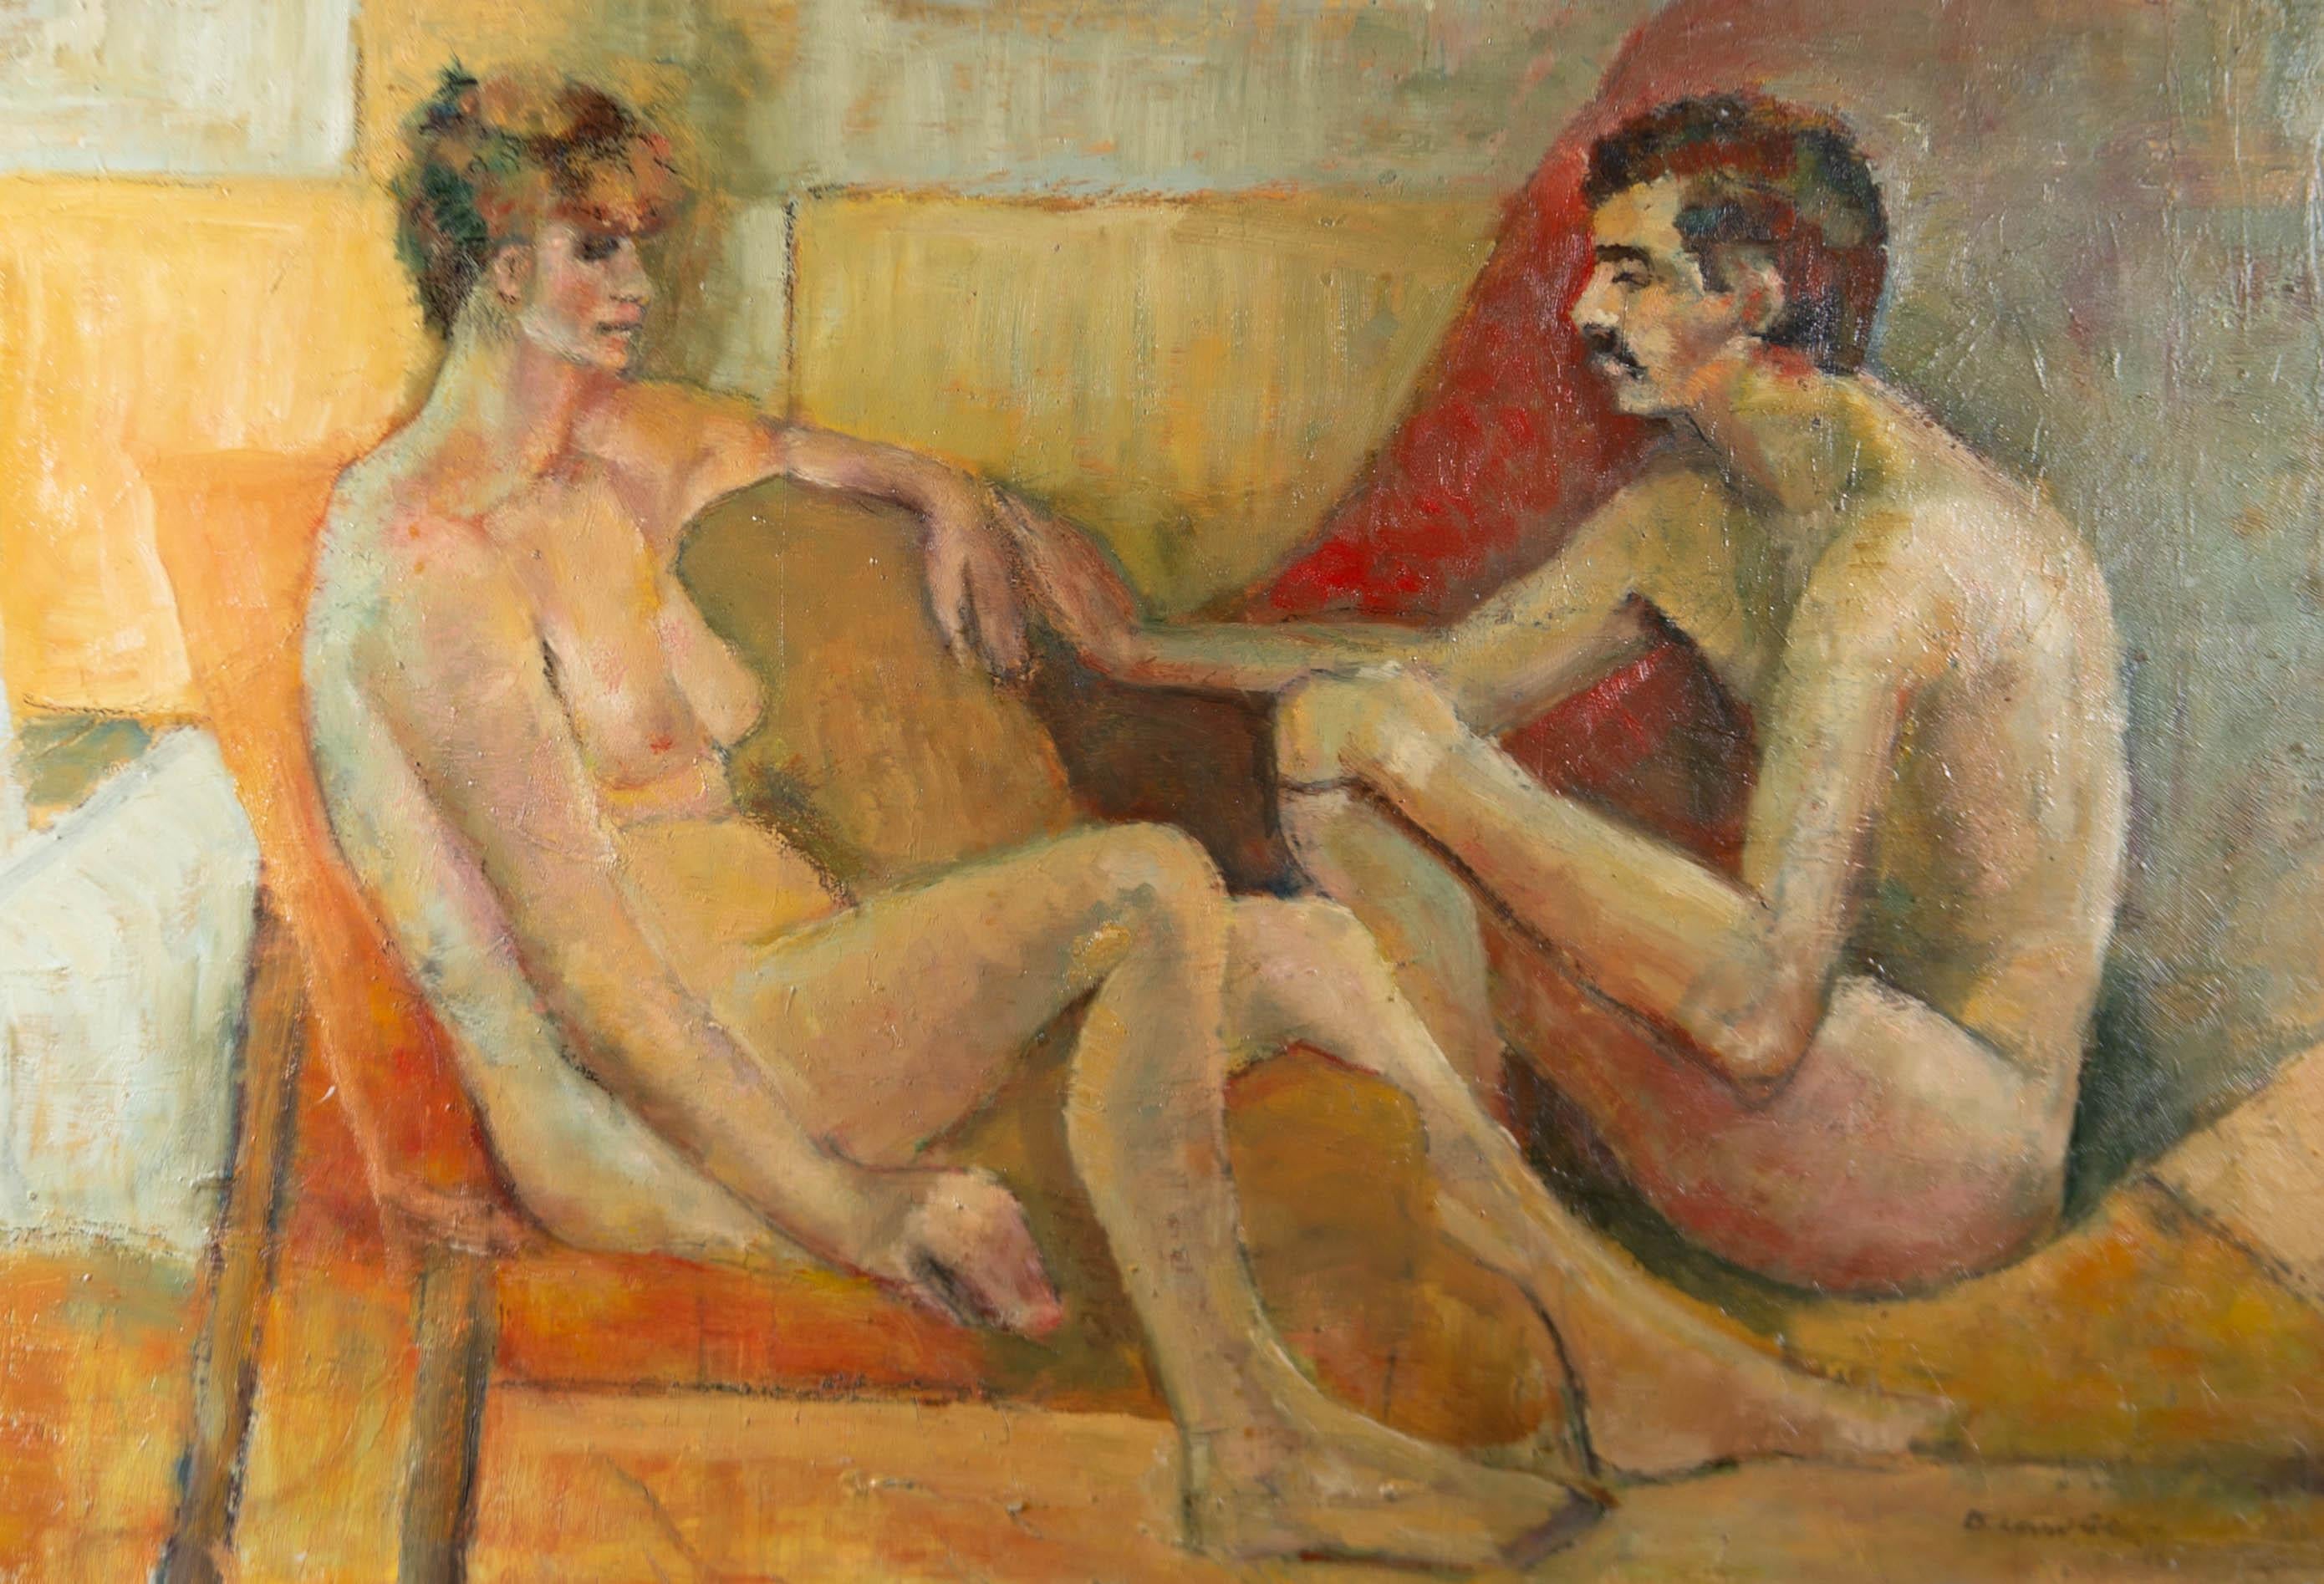 Unknown Nude Painting - Betty Leuw Green (1918-2014) - Signed 1986 Oil, Two Figures